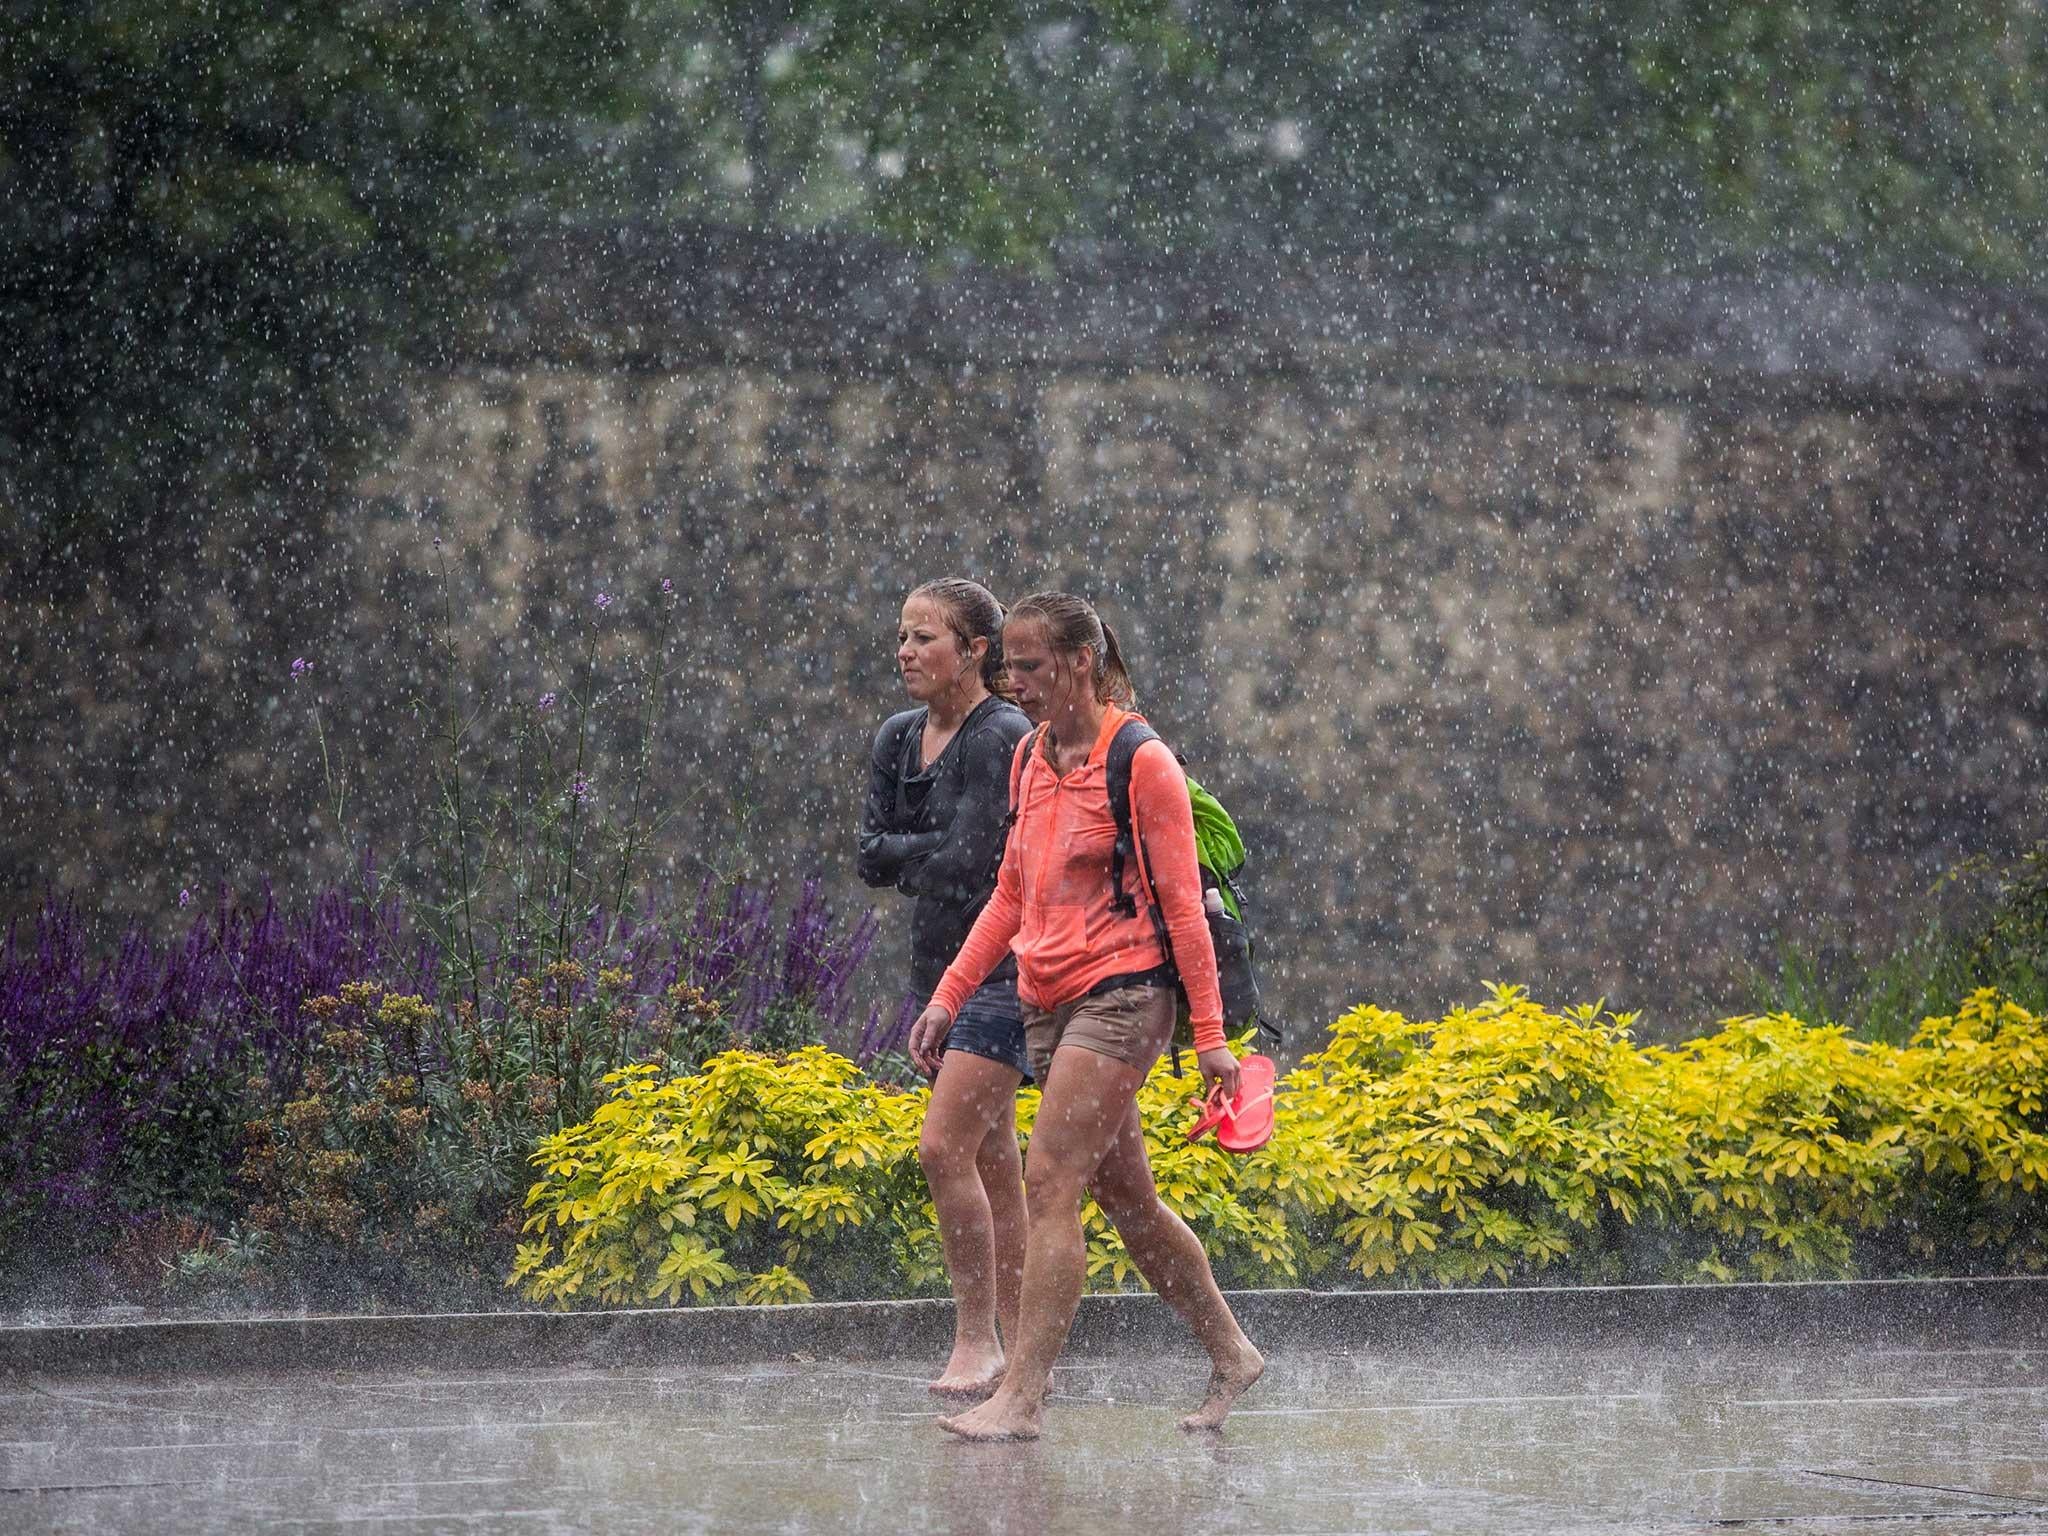 UK weather forecast: Heavy rain to hit swathes of country